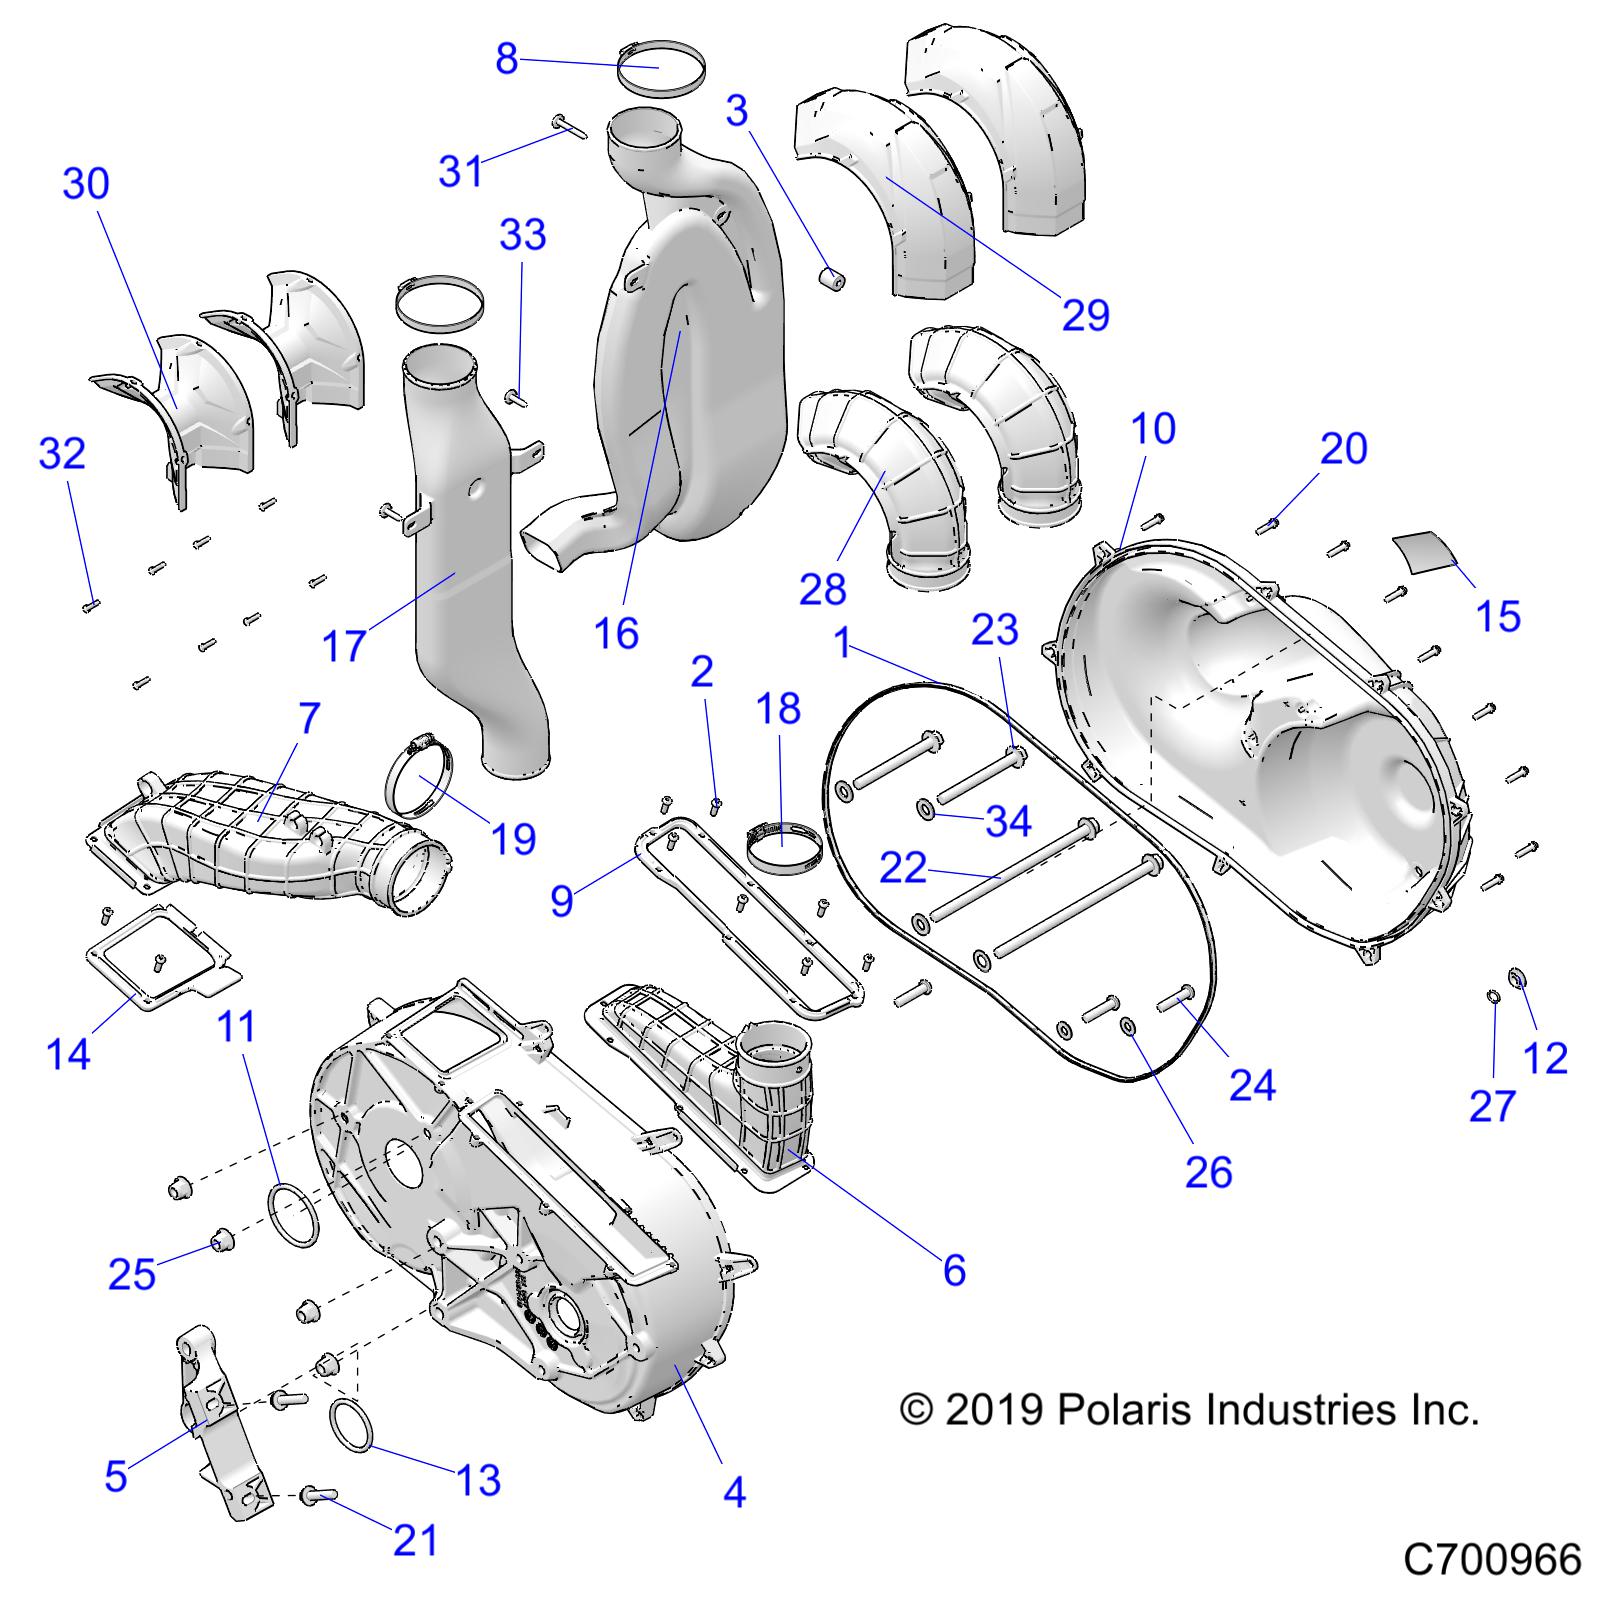 Part Number : 5143356 COVER-CLUTCH INNER MACH